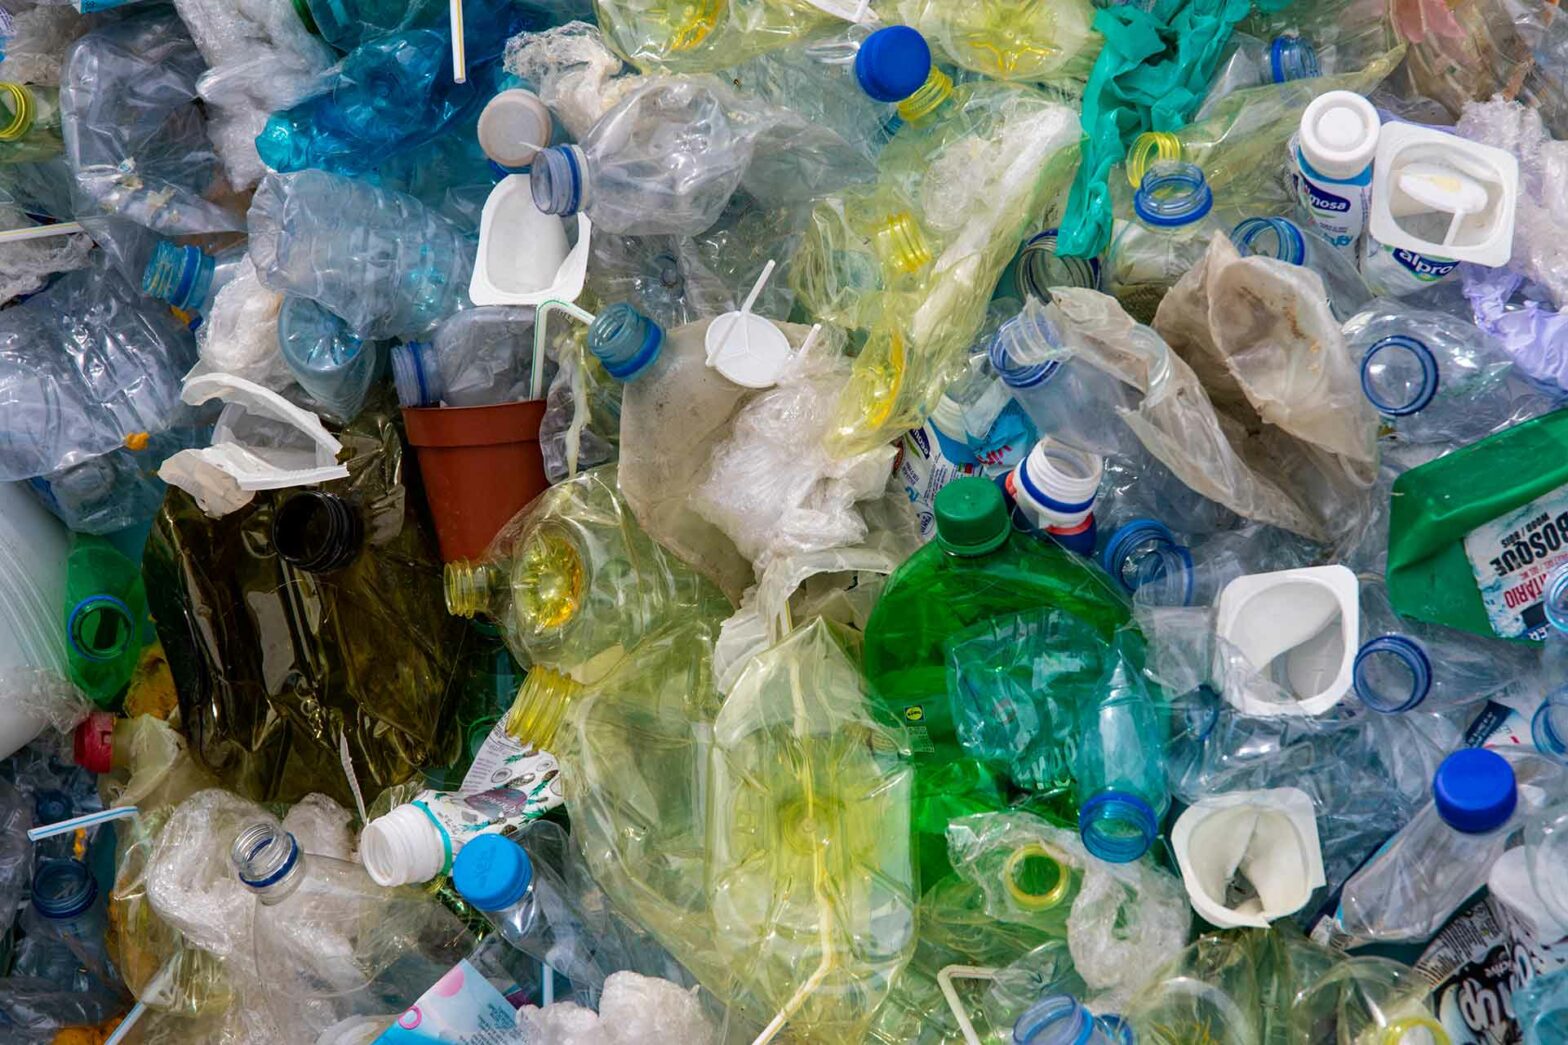 Blog-How Bad Really is the Plastic Problem?